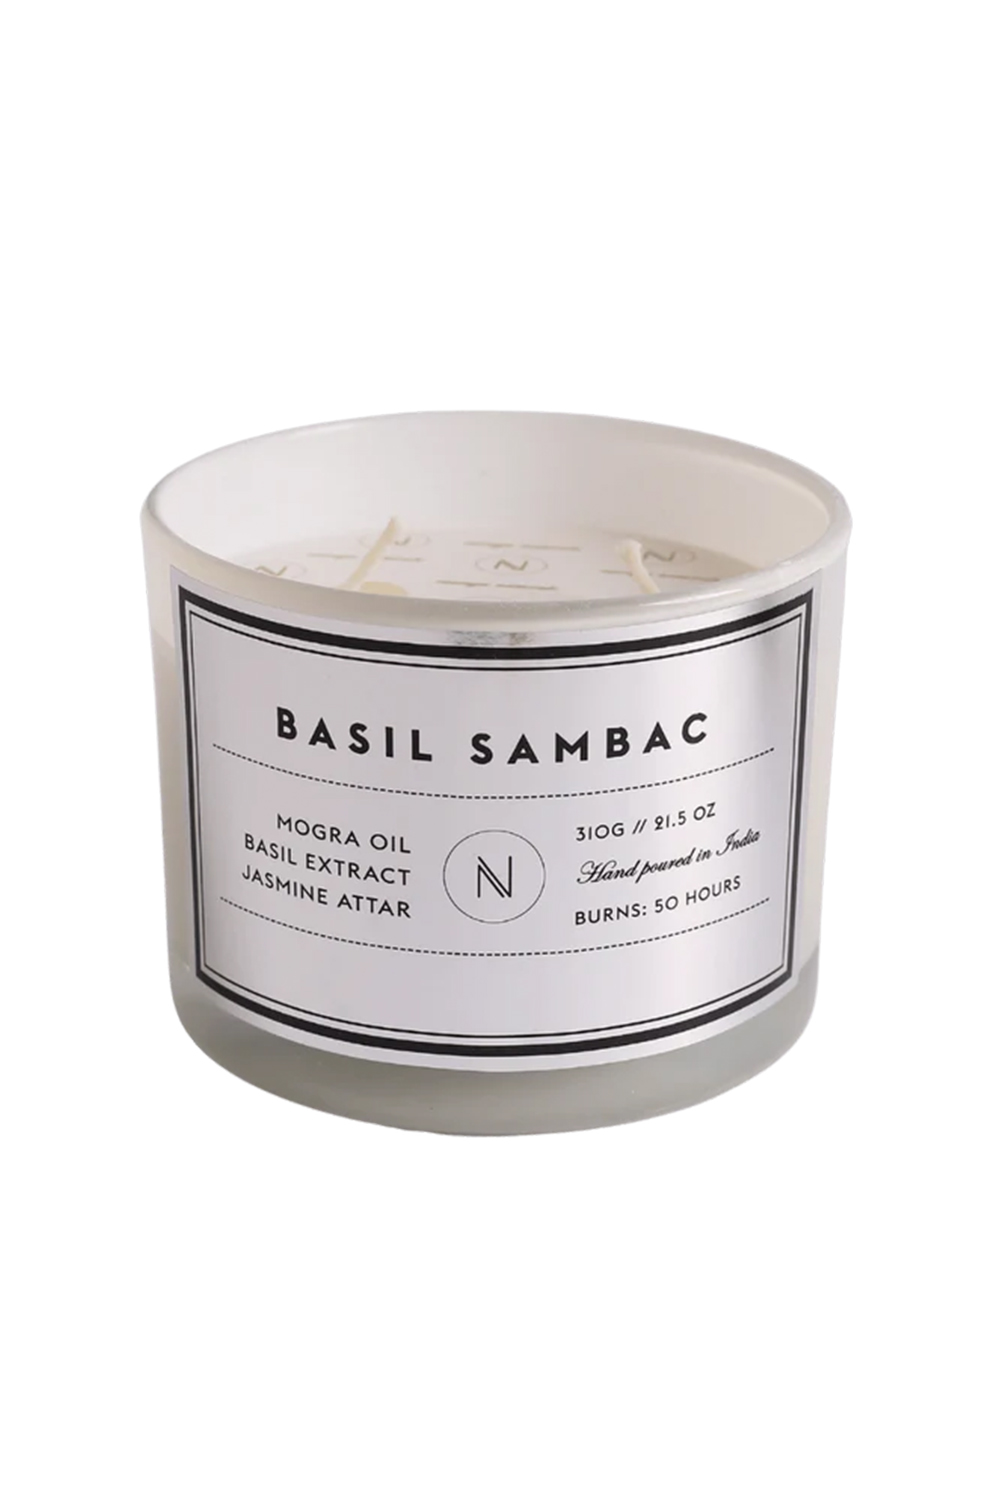 Basil infused in Sambac (Candle) -310g